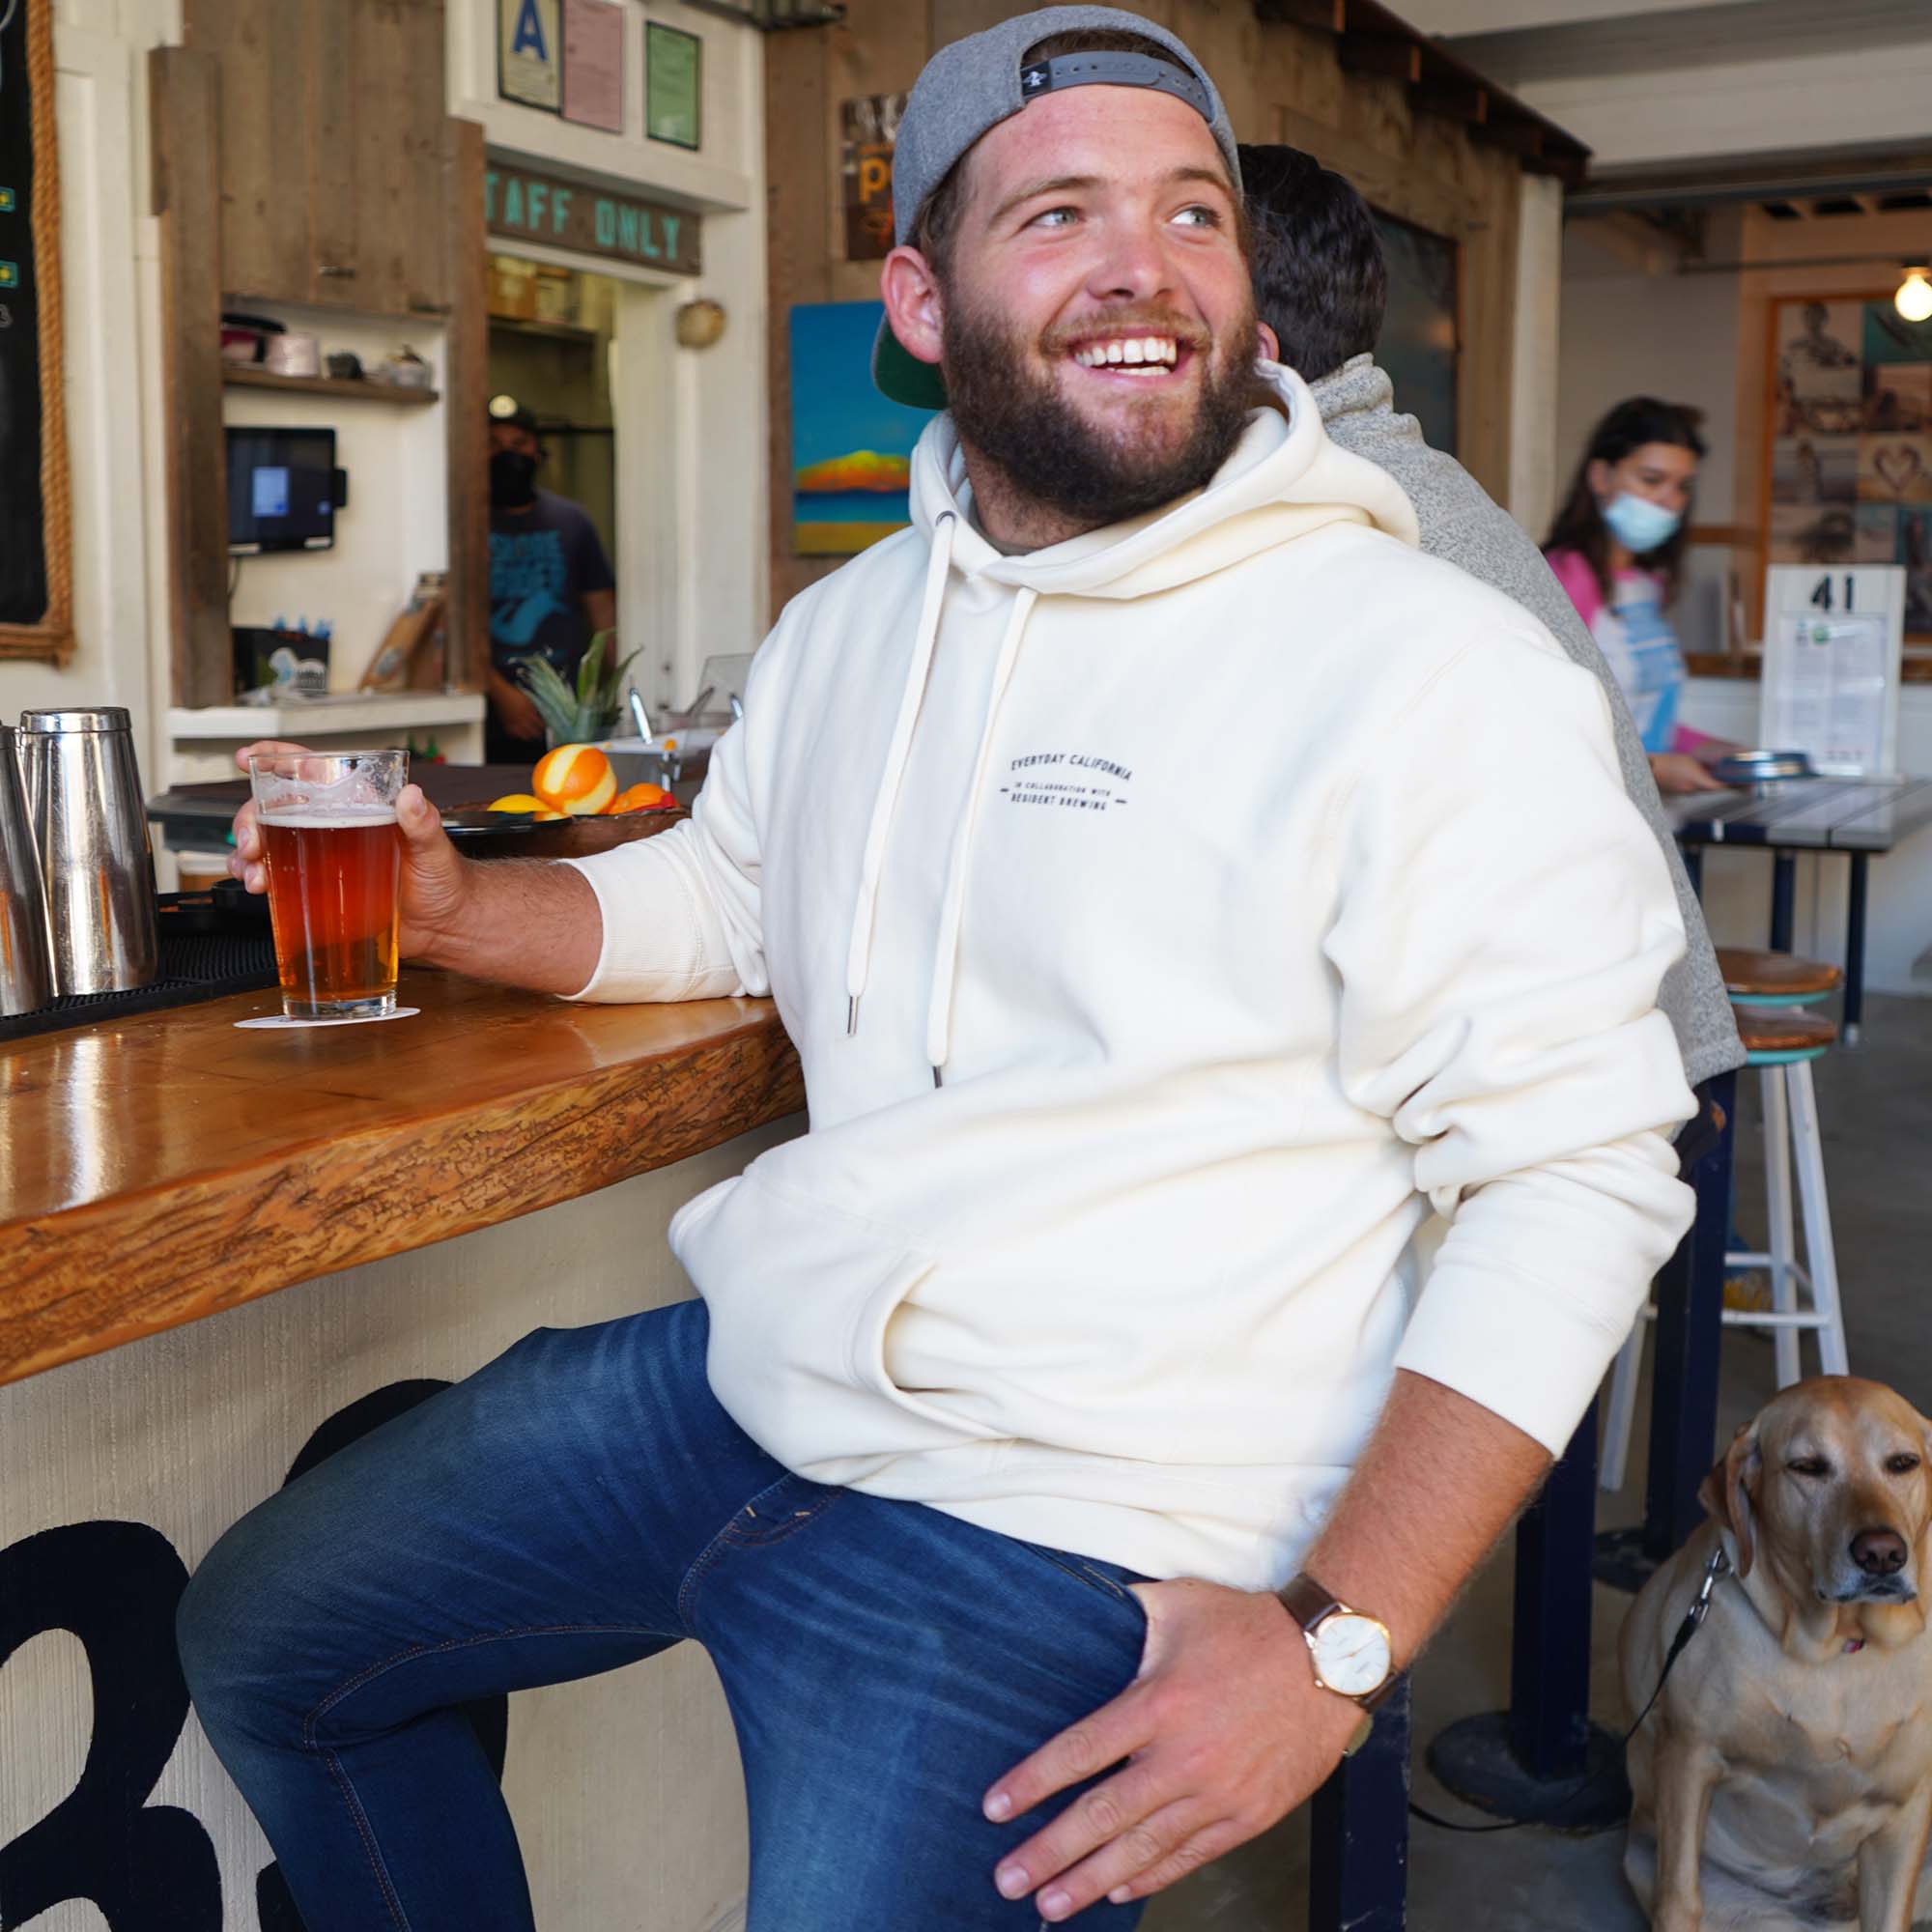 Everyday California Brewmaster Hoodie - thick cream hoodie with Brutus the Bear logo holding a beer